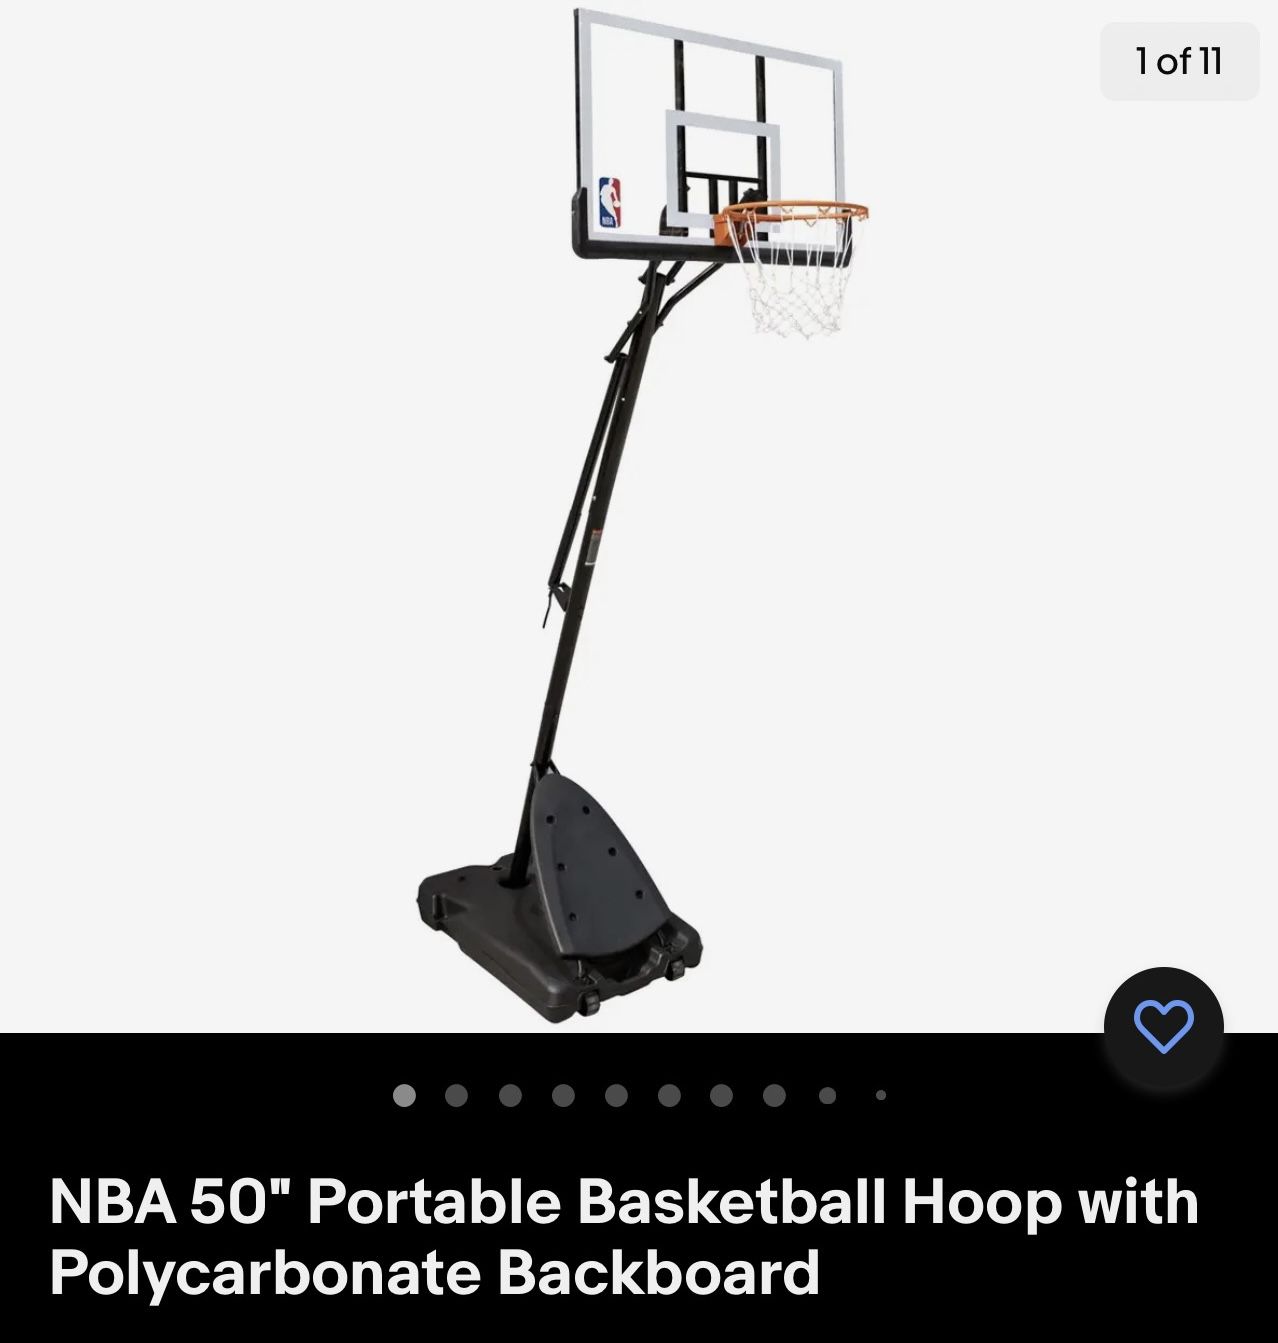 Basketball hoop, brand new in the box